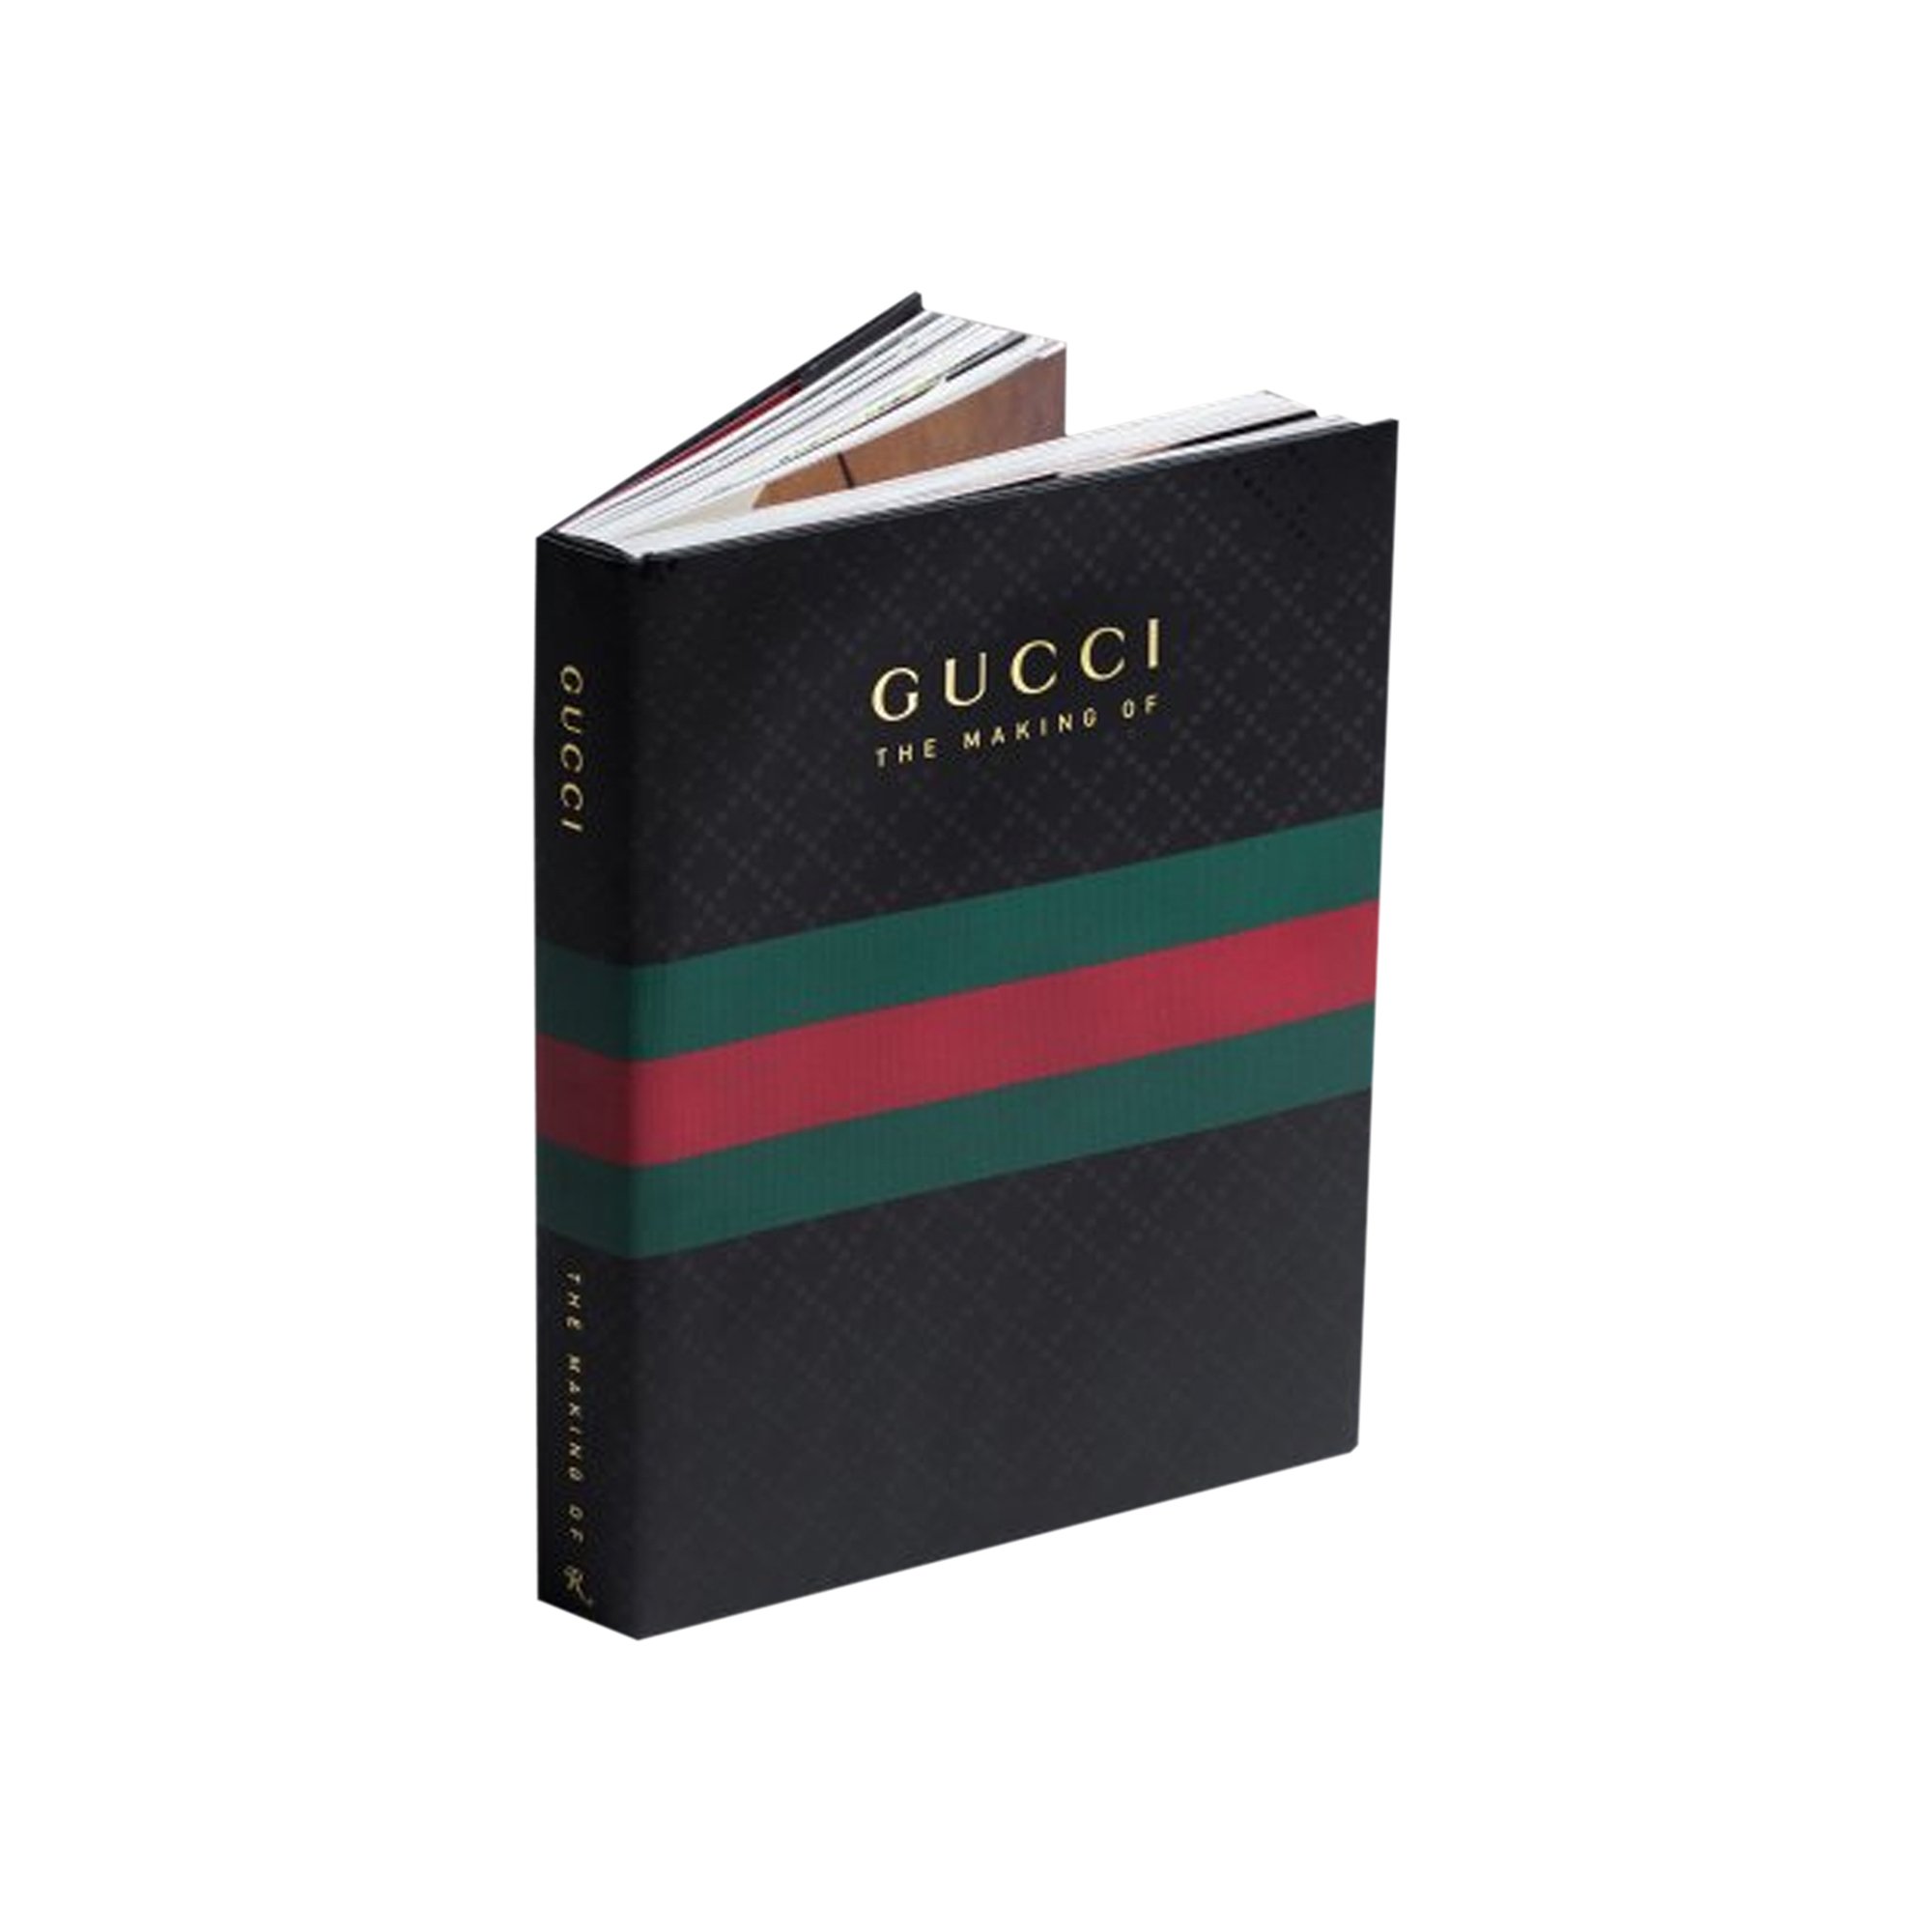 Buy The Making Of Gucci Book Edited by Frida Giannini - 978 0 8478 